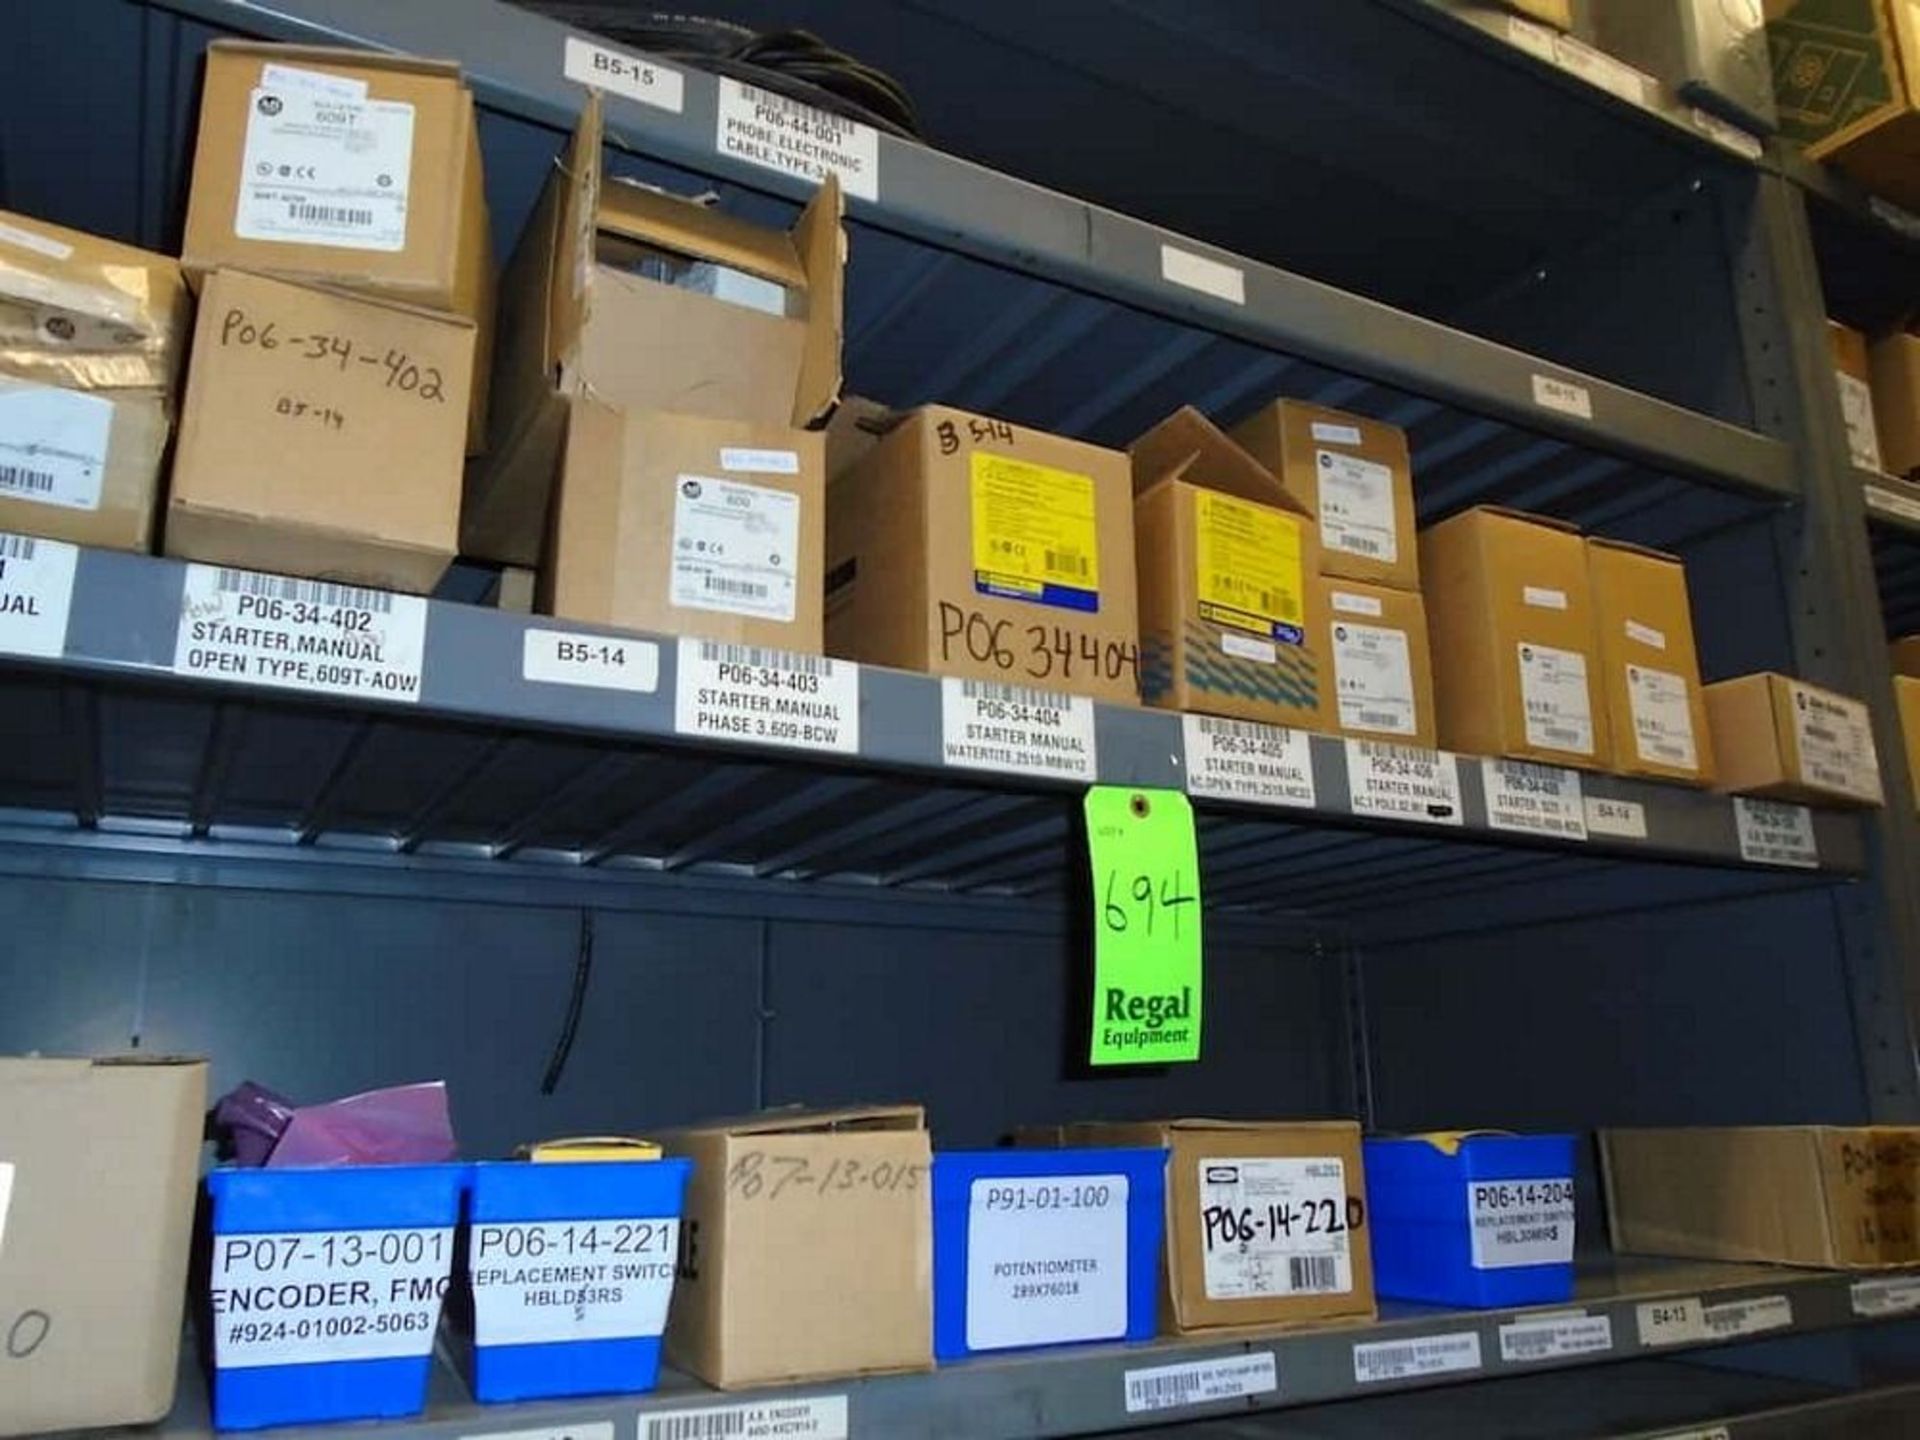 Contents of Shelves ( Assorted Hubbell Electrical Parts)